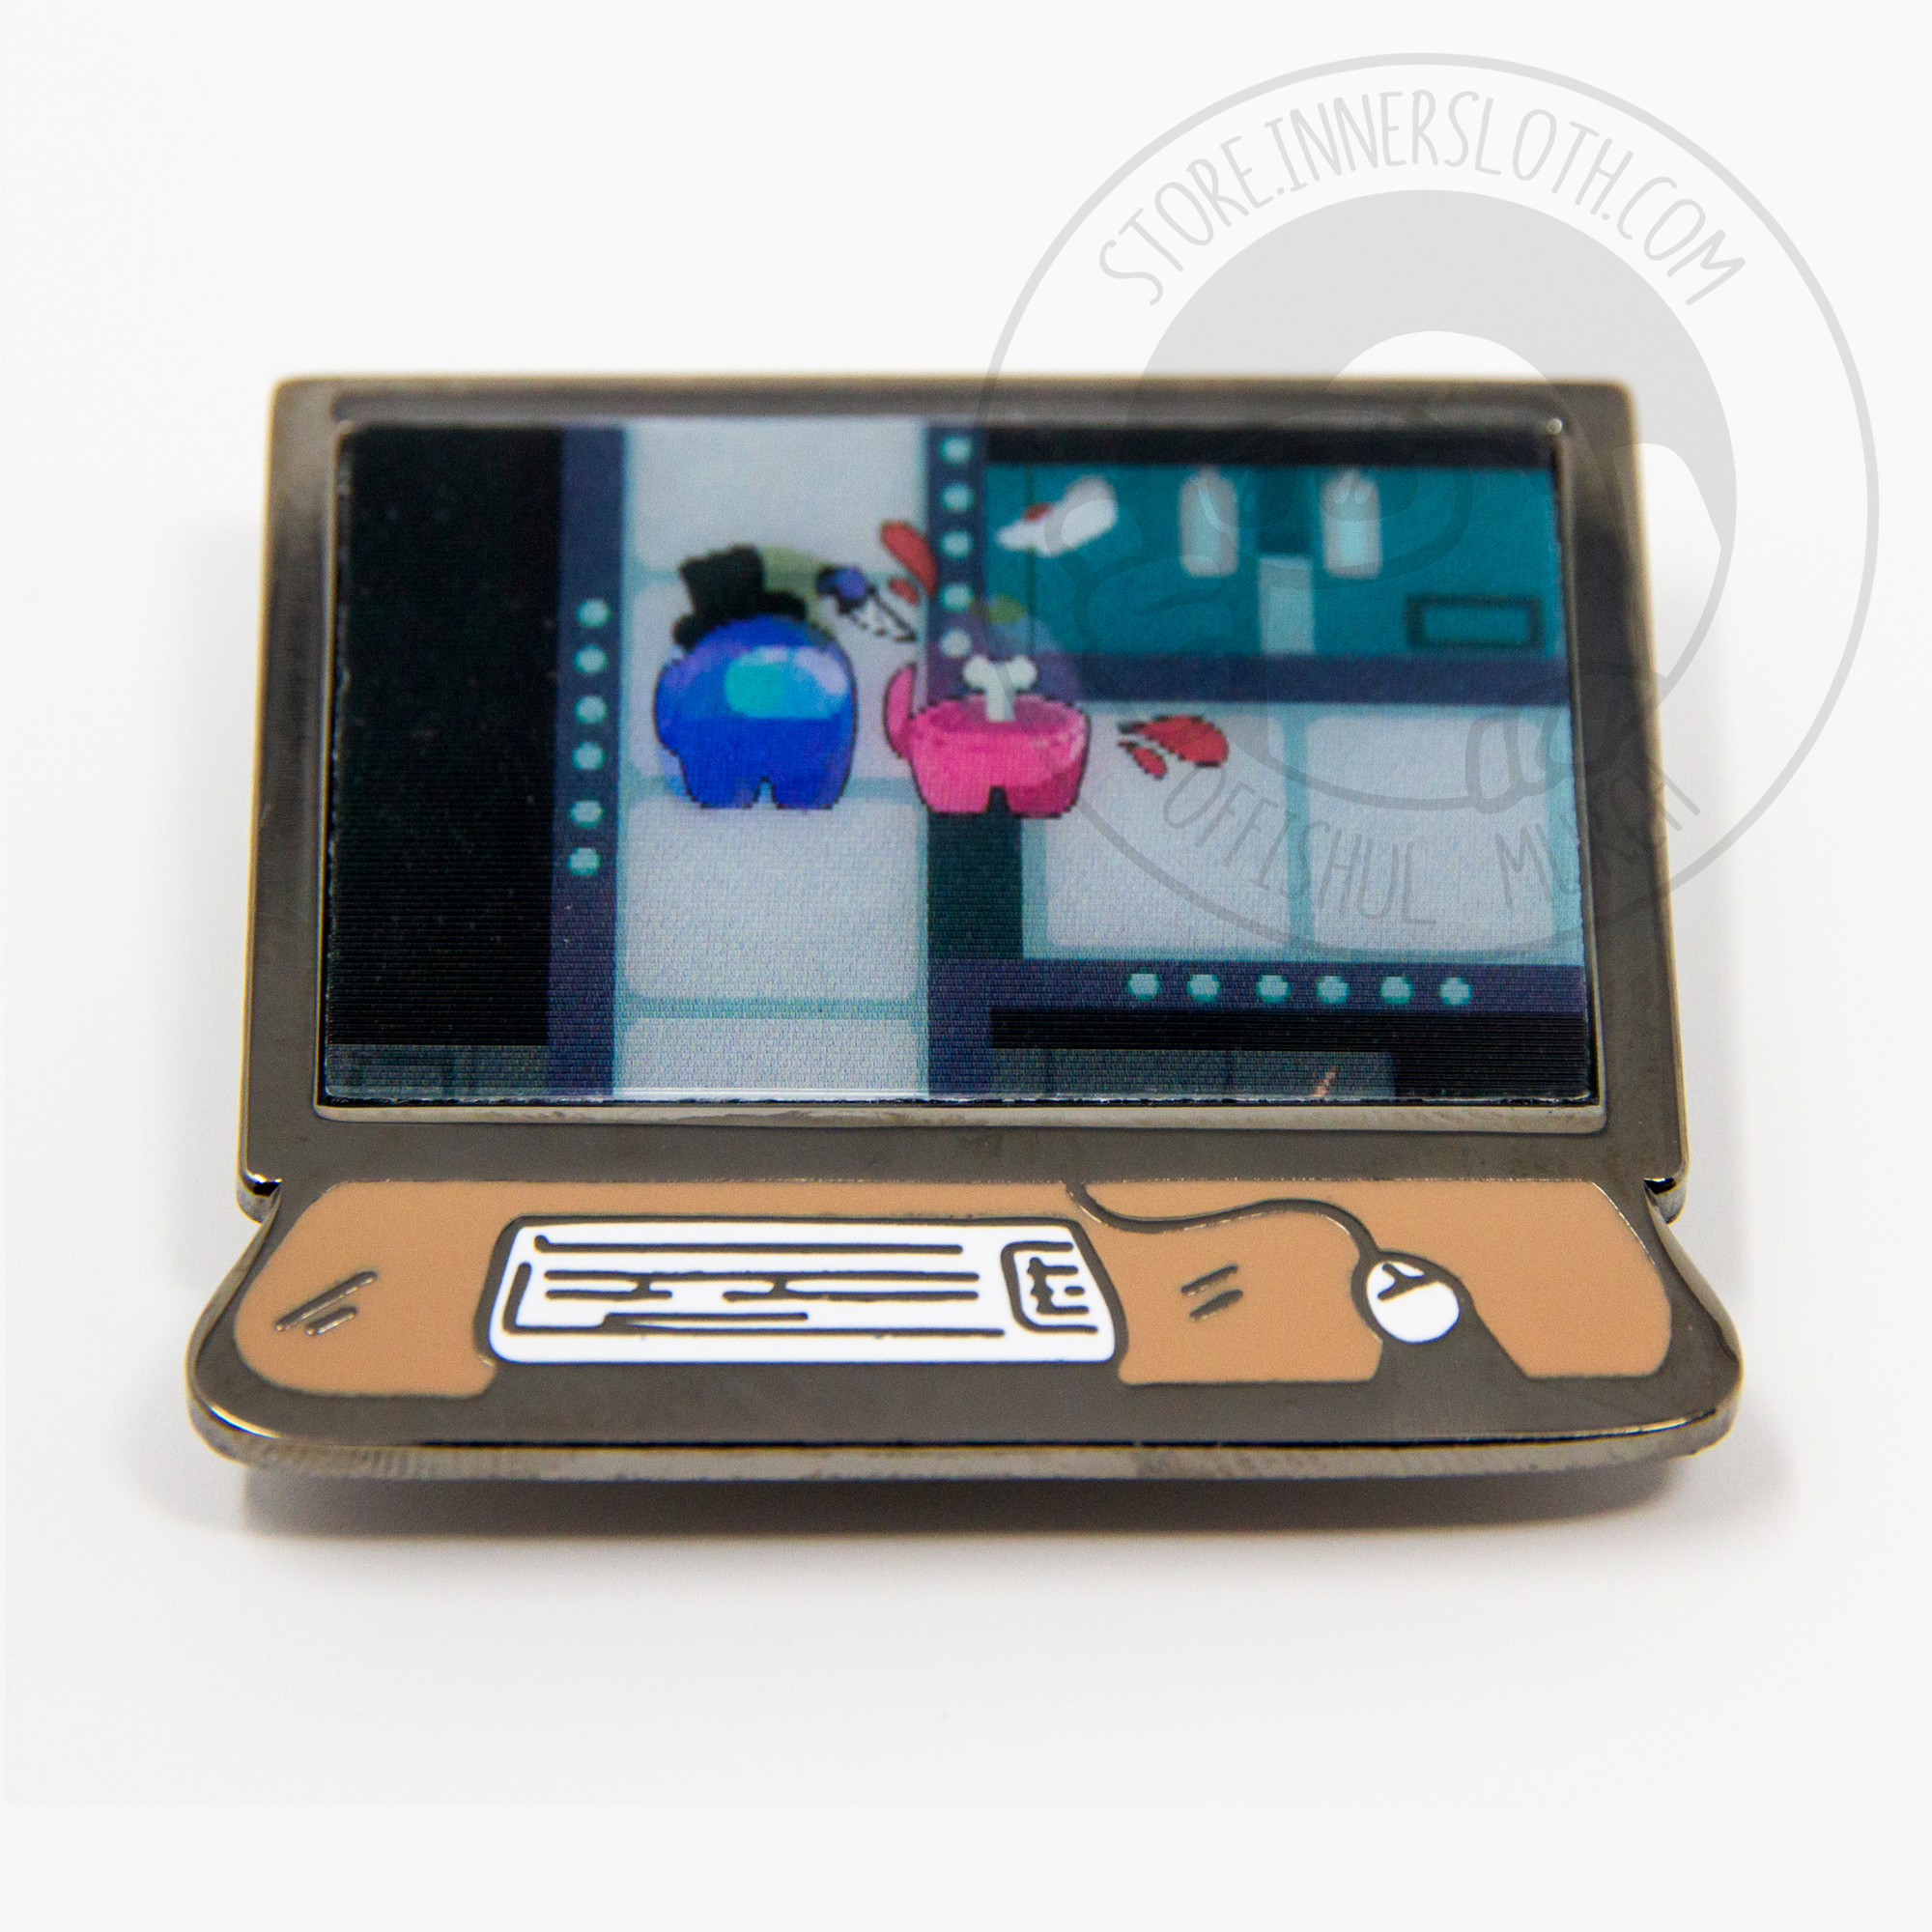 An animated gif of the lenticular security camera pin, showing a computer screen with deskmat, keyboard, and wired mouse beneath. The image dissolves back and forth of a blue crewmate with a tophat stabbing a pink crewmate with an egg hat.